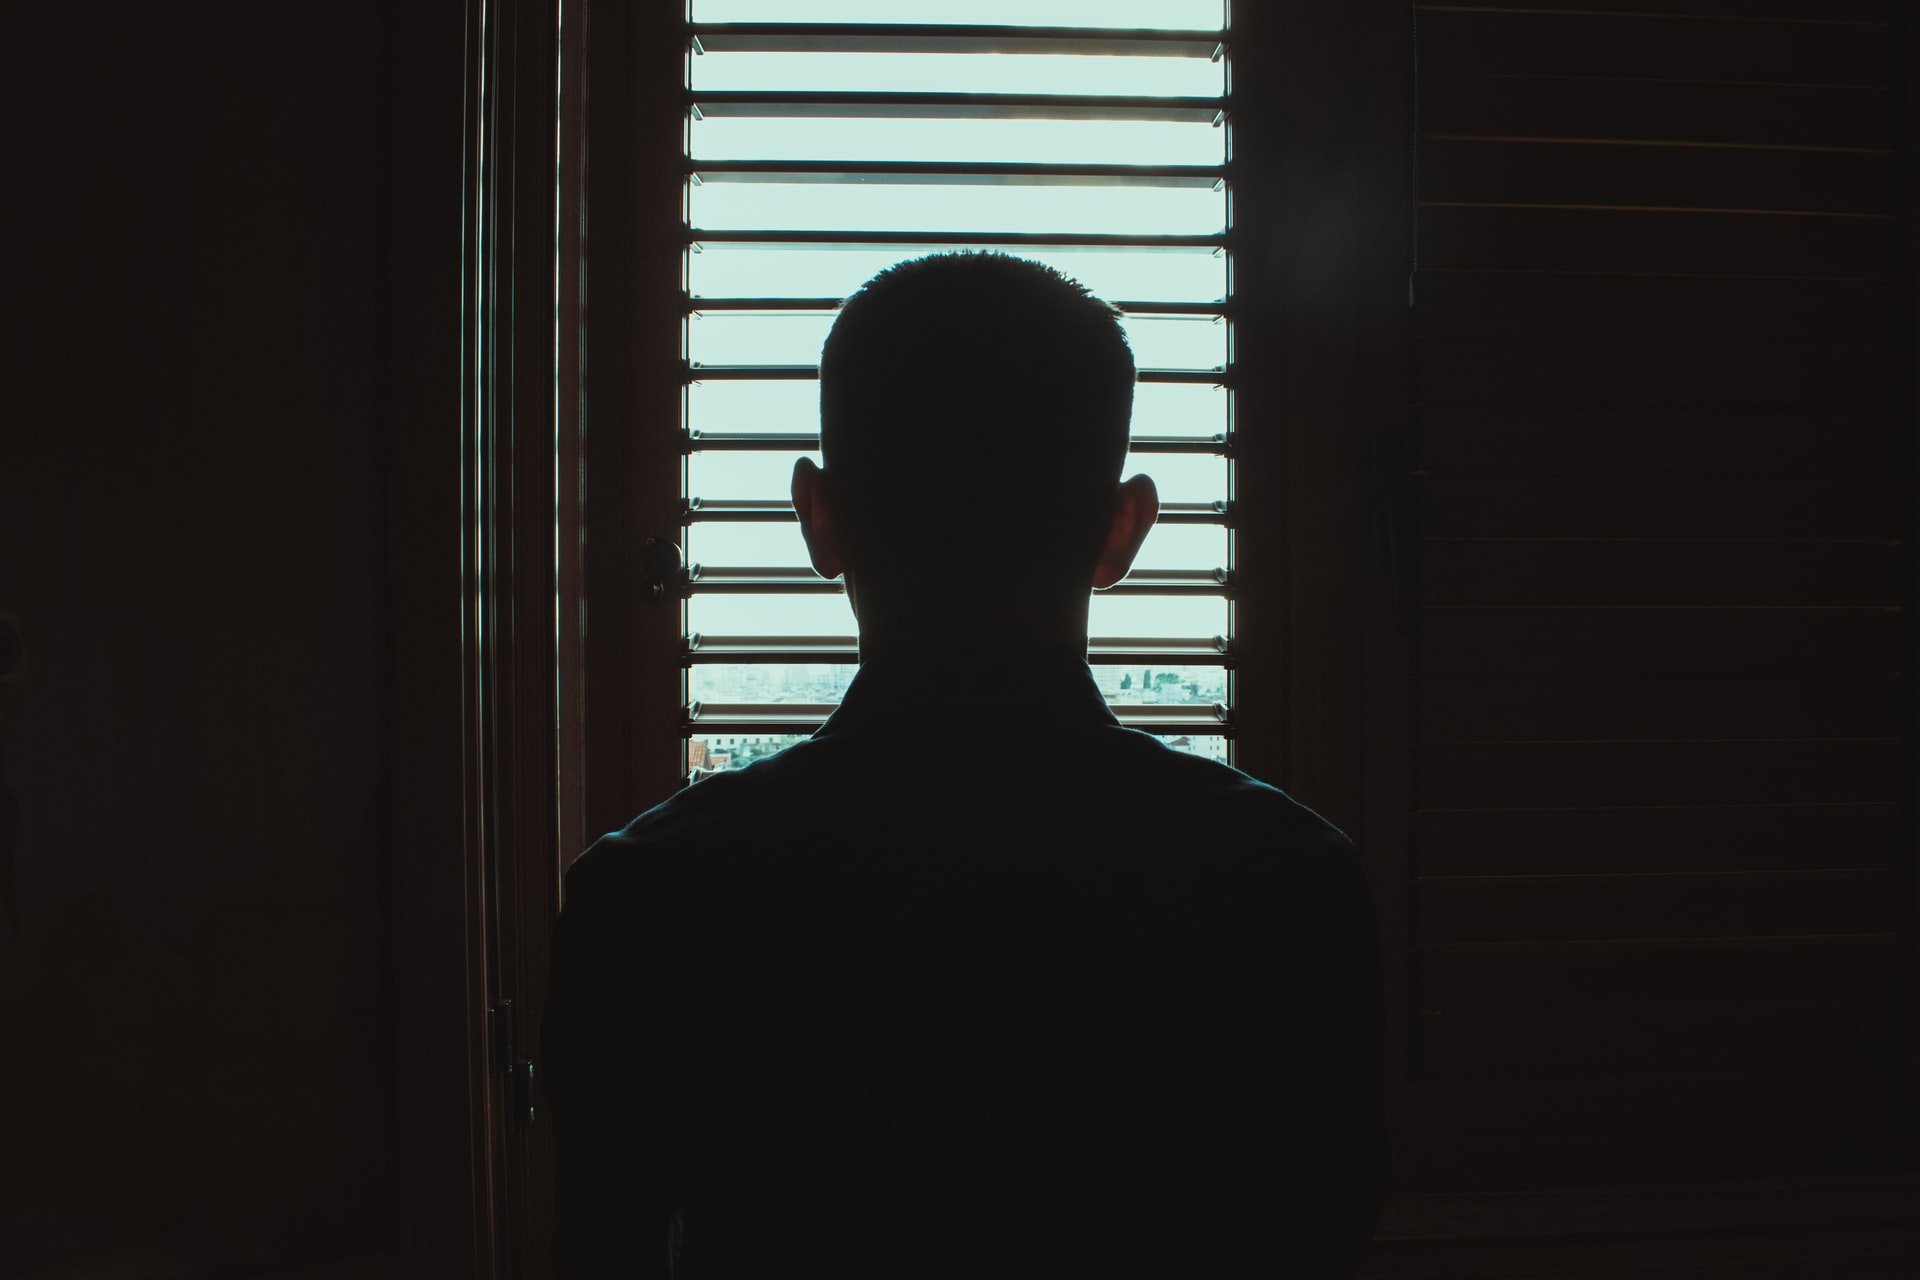 The boy confessed he wanted to have a relationship with his father. | Source: Unsplash